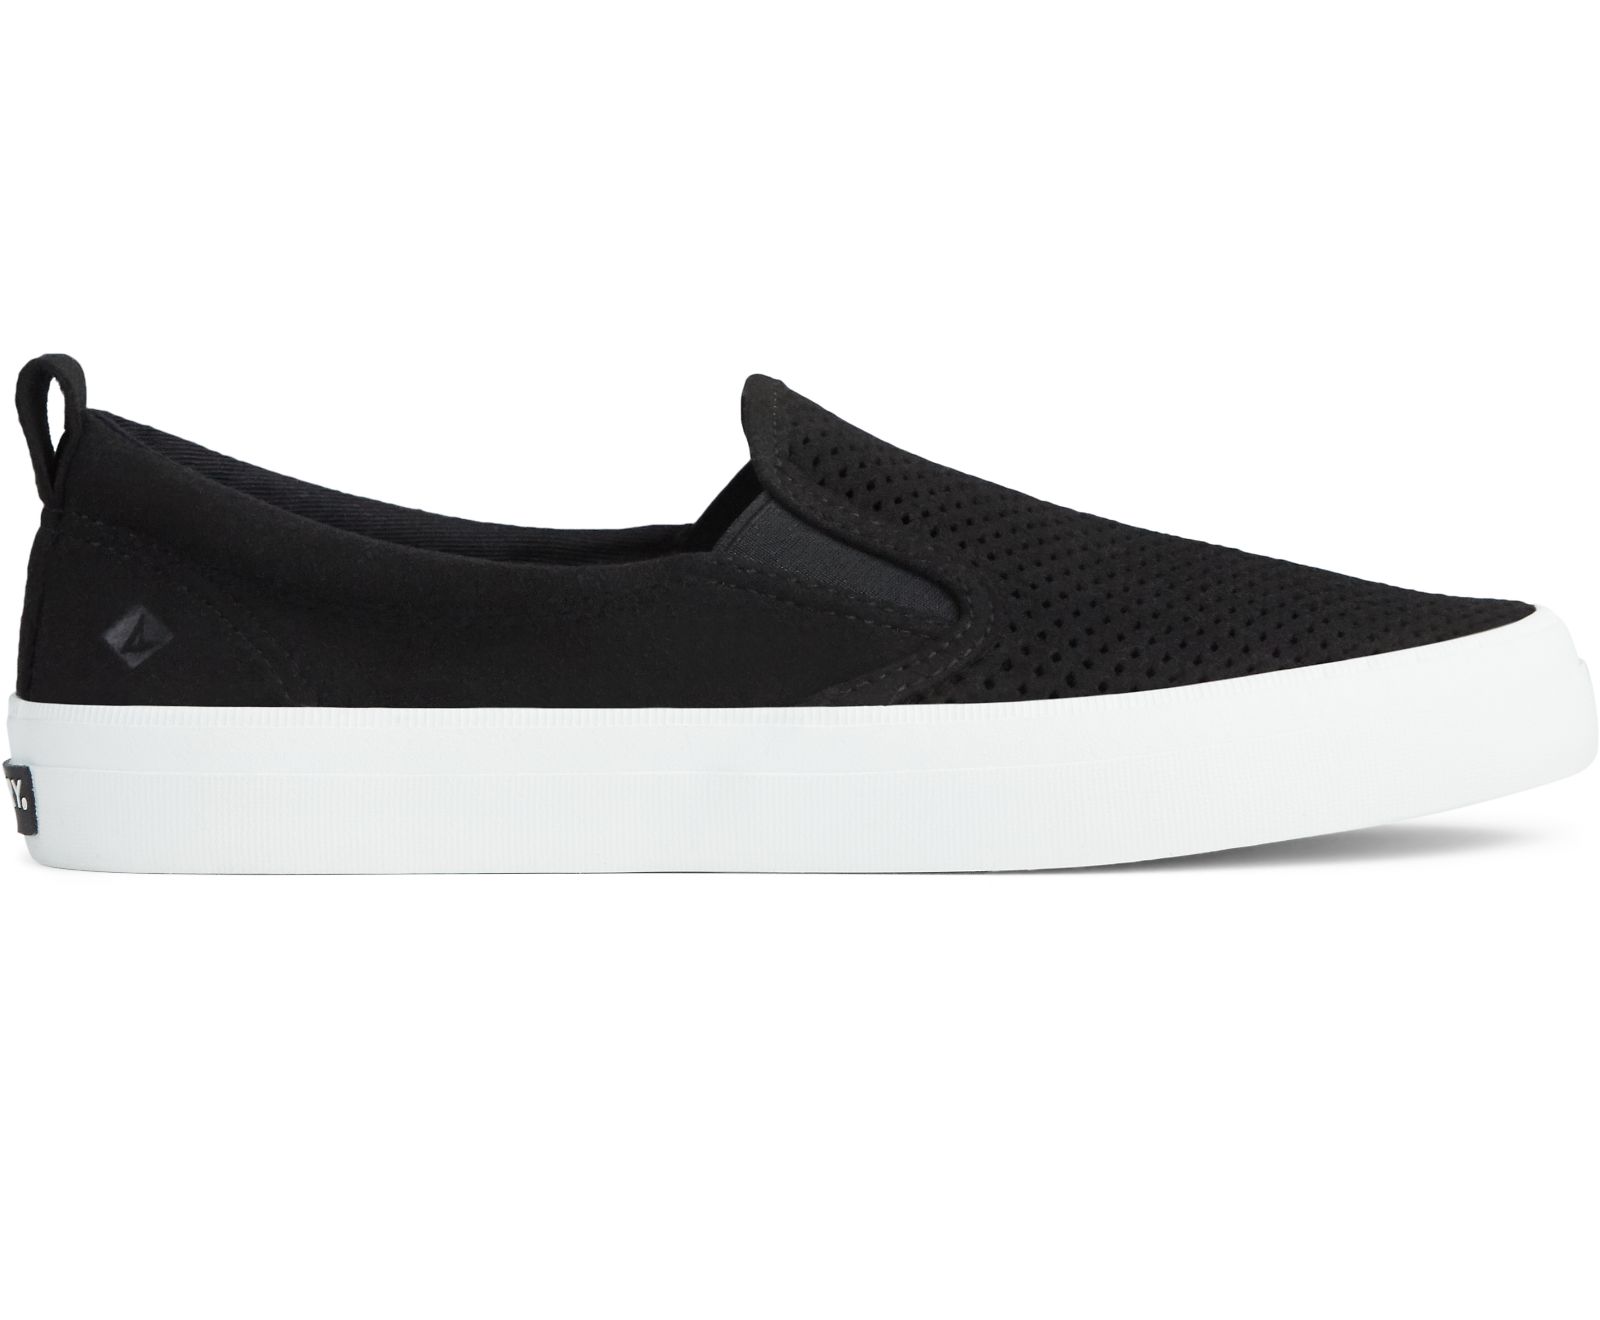 Women's Crest Twin Gore Perforated Slip On Sneaker - Black